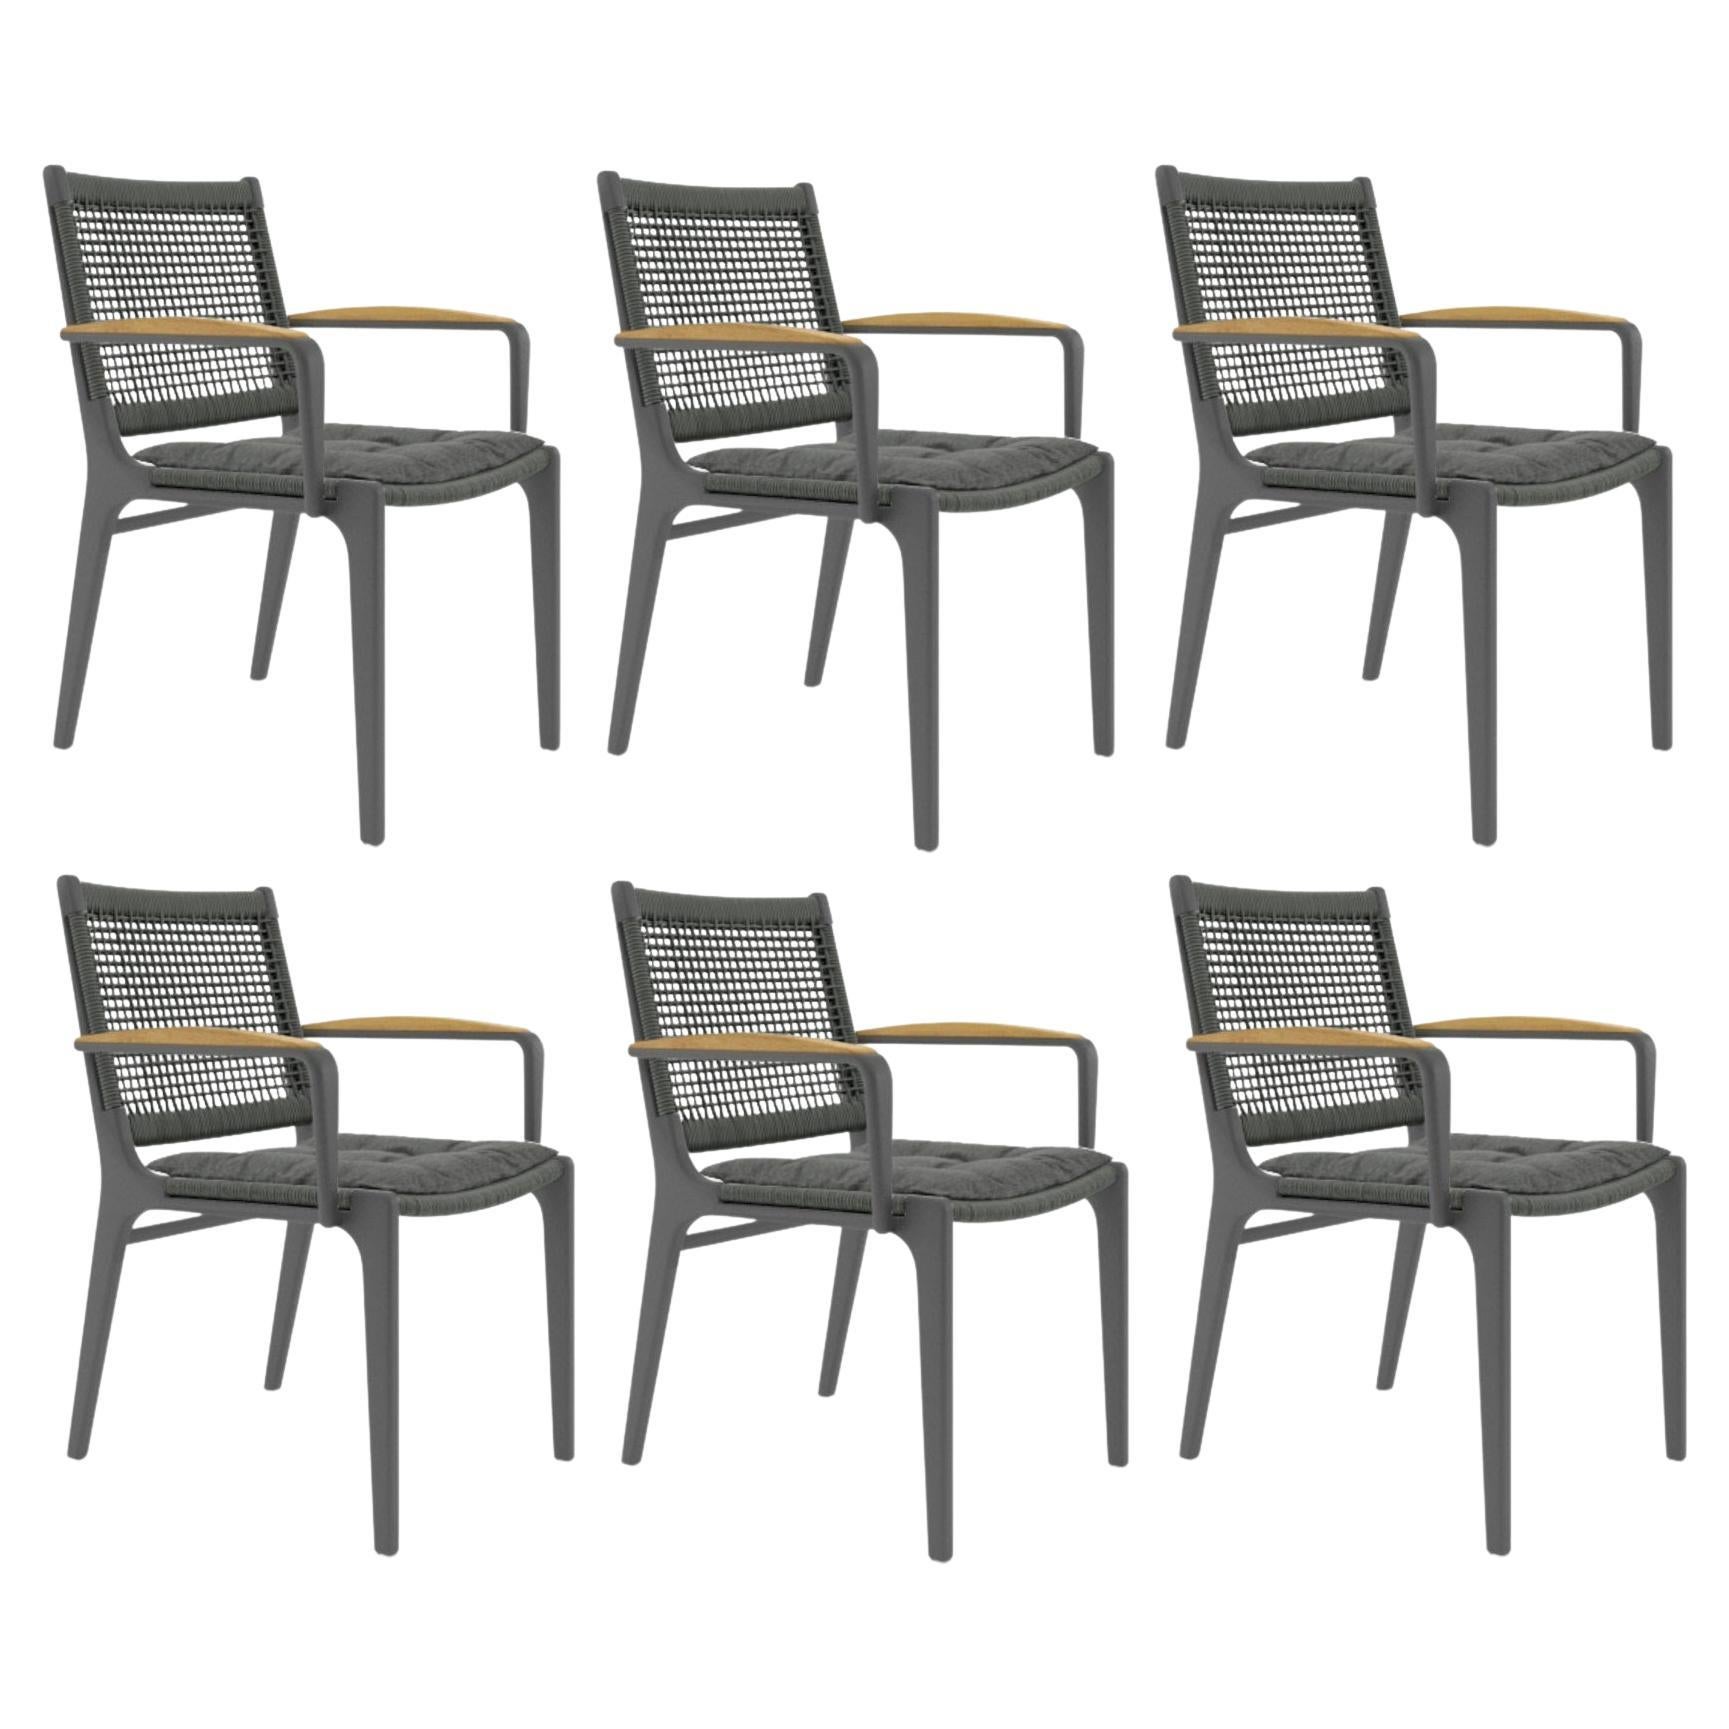 Outdoor Dining Chair with Armrests & Rope Detailing / Set of 6